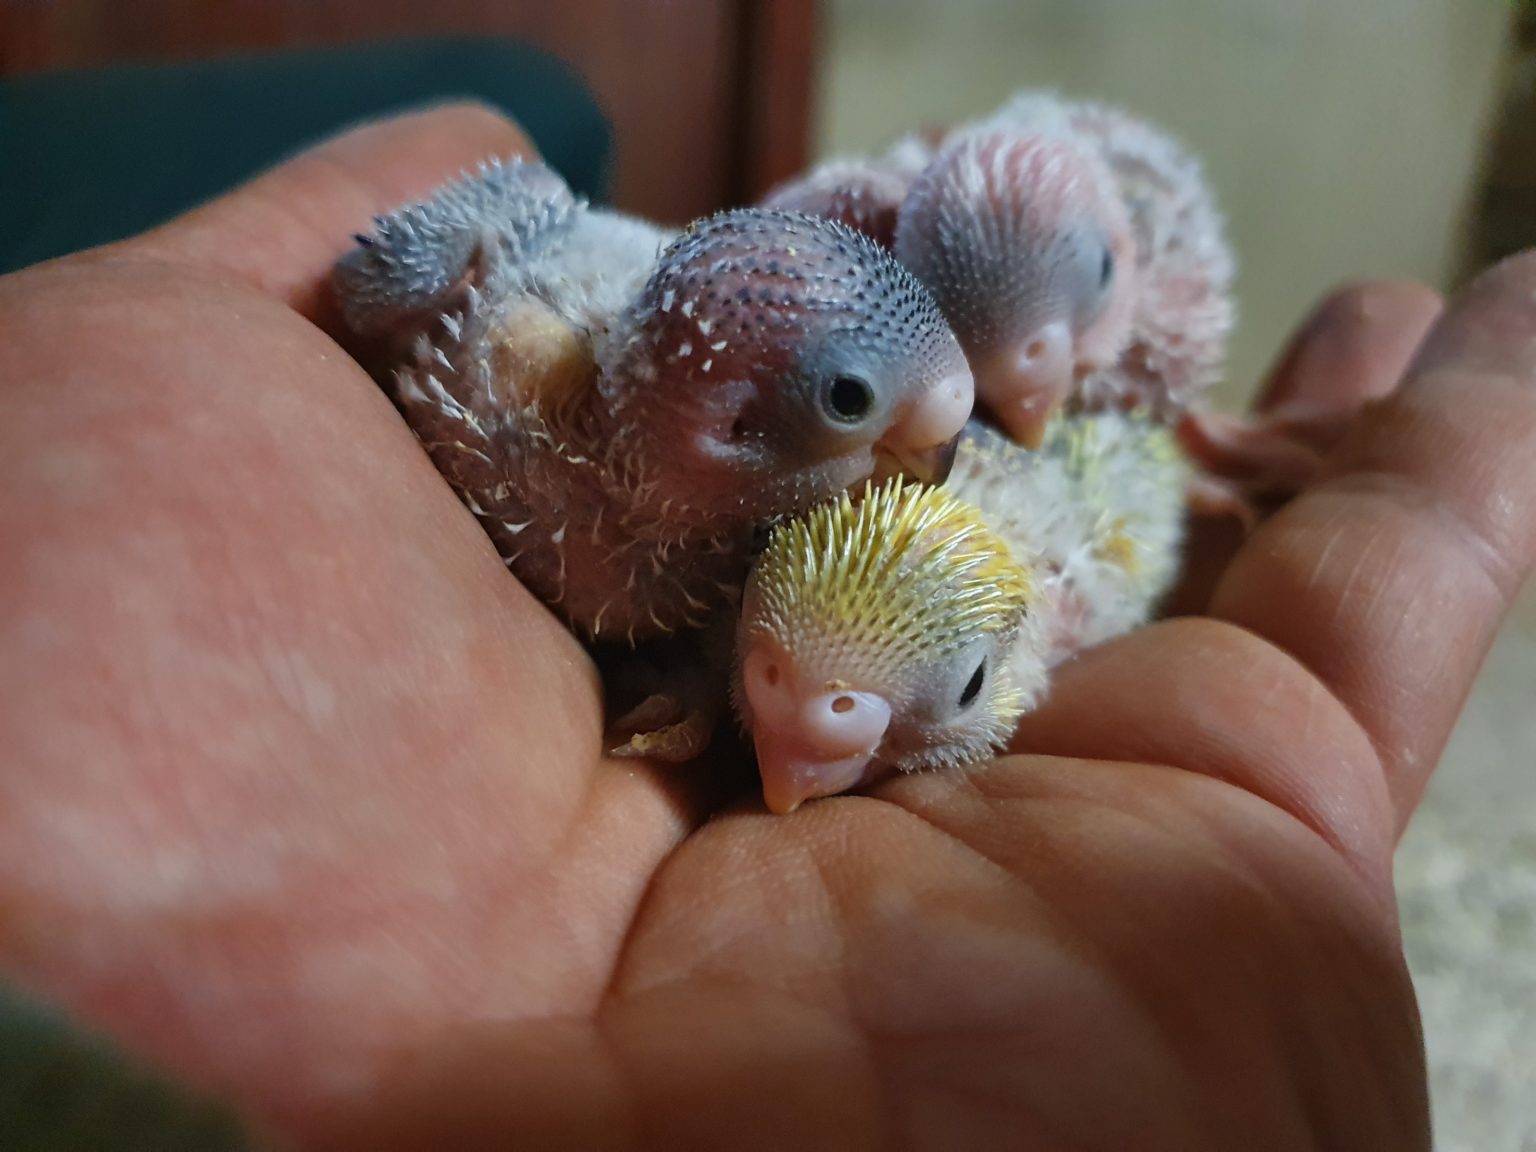 Baby chicks held in the palm of a hand